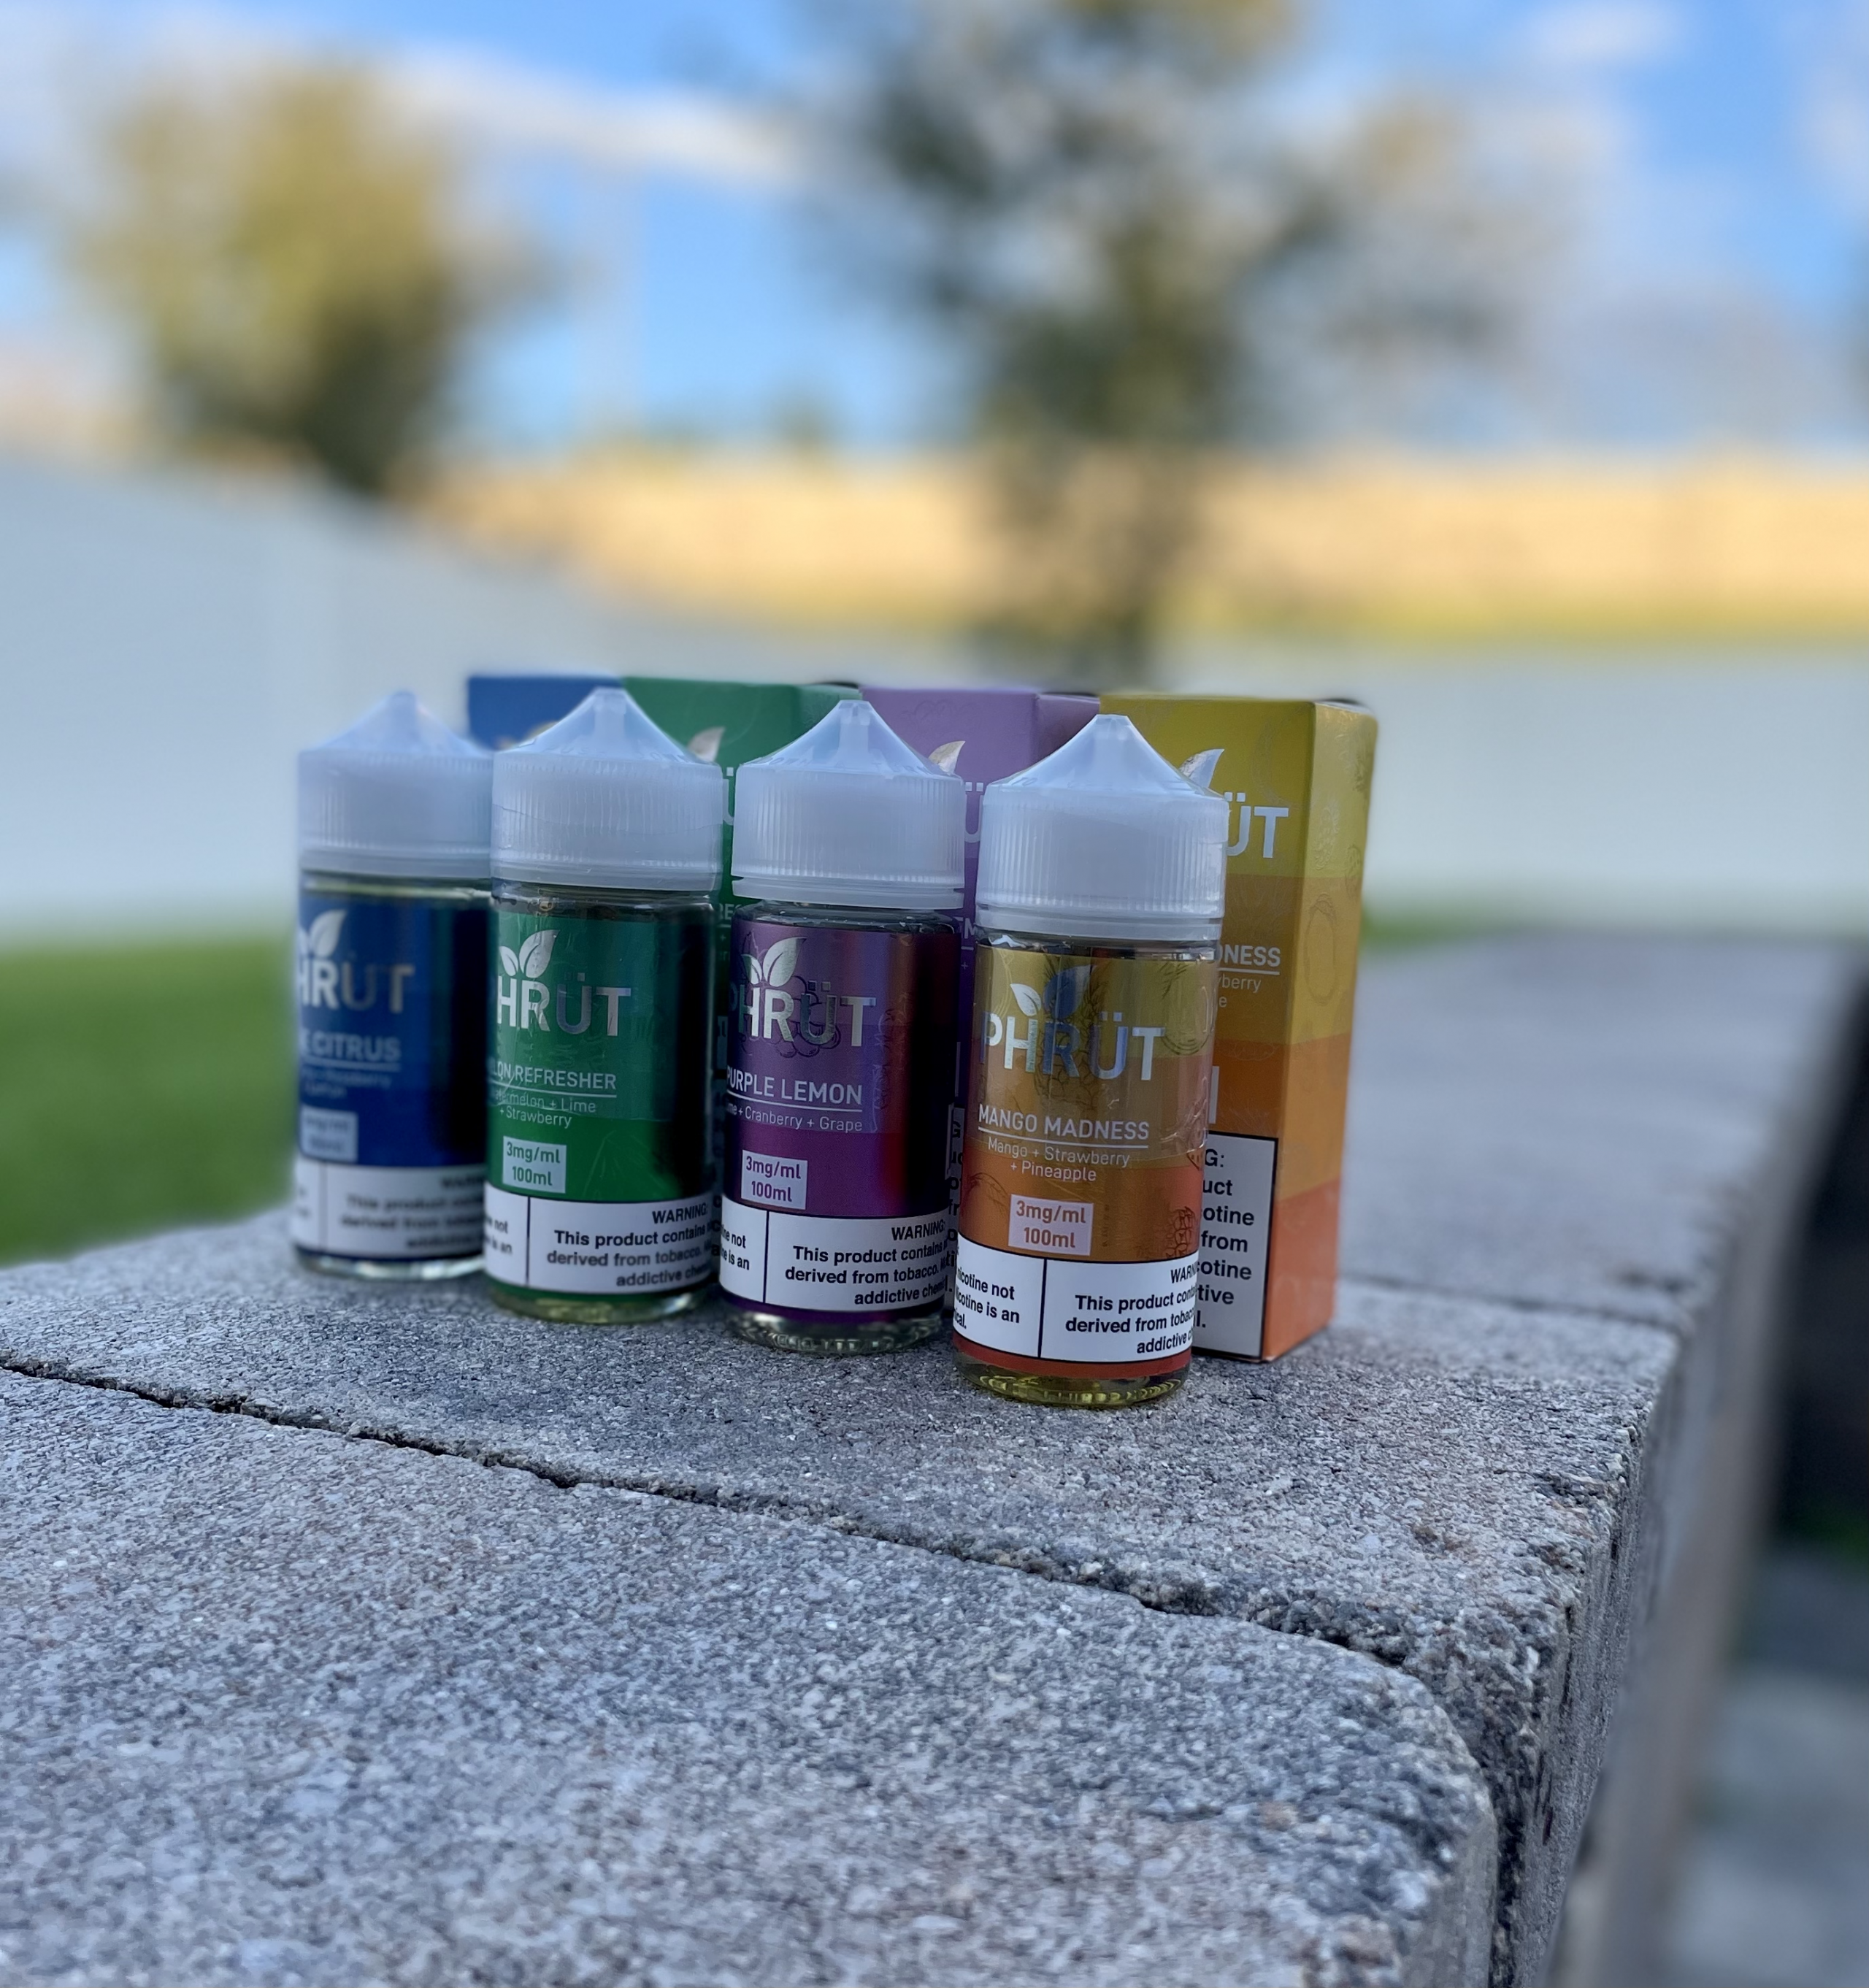 Check out our review of Phrut EJuice.